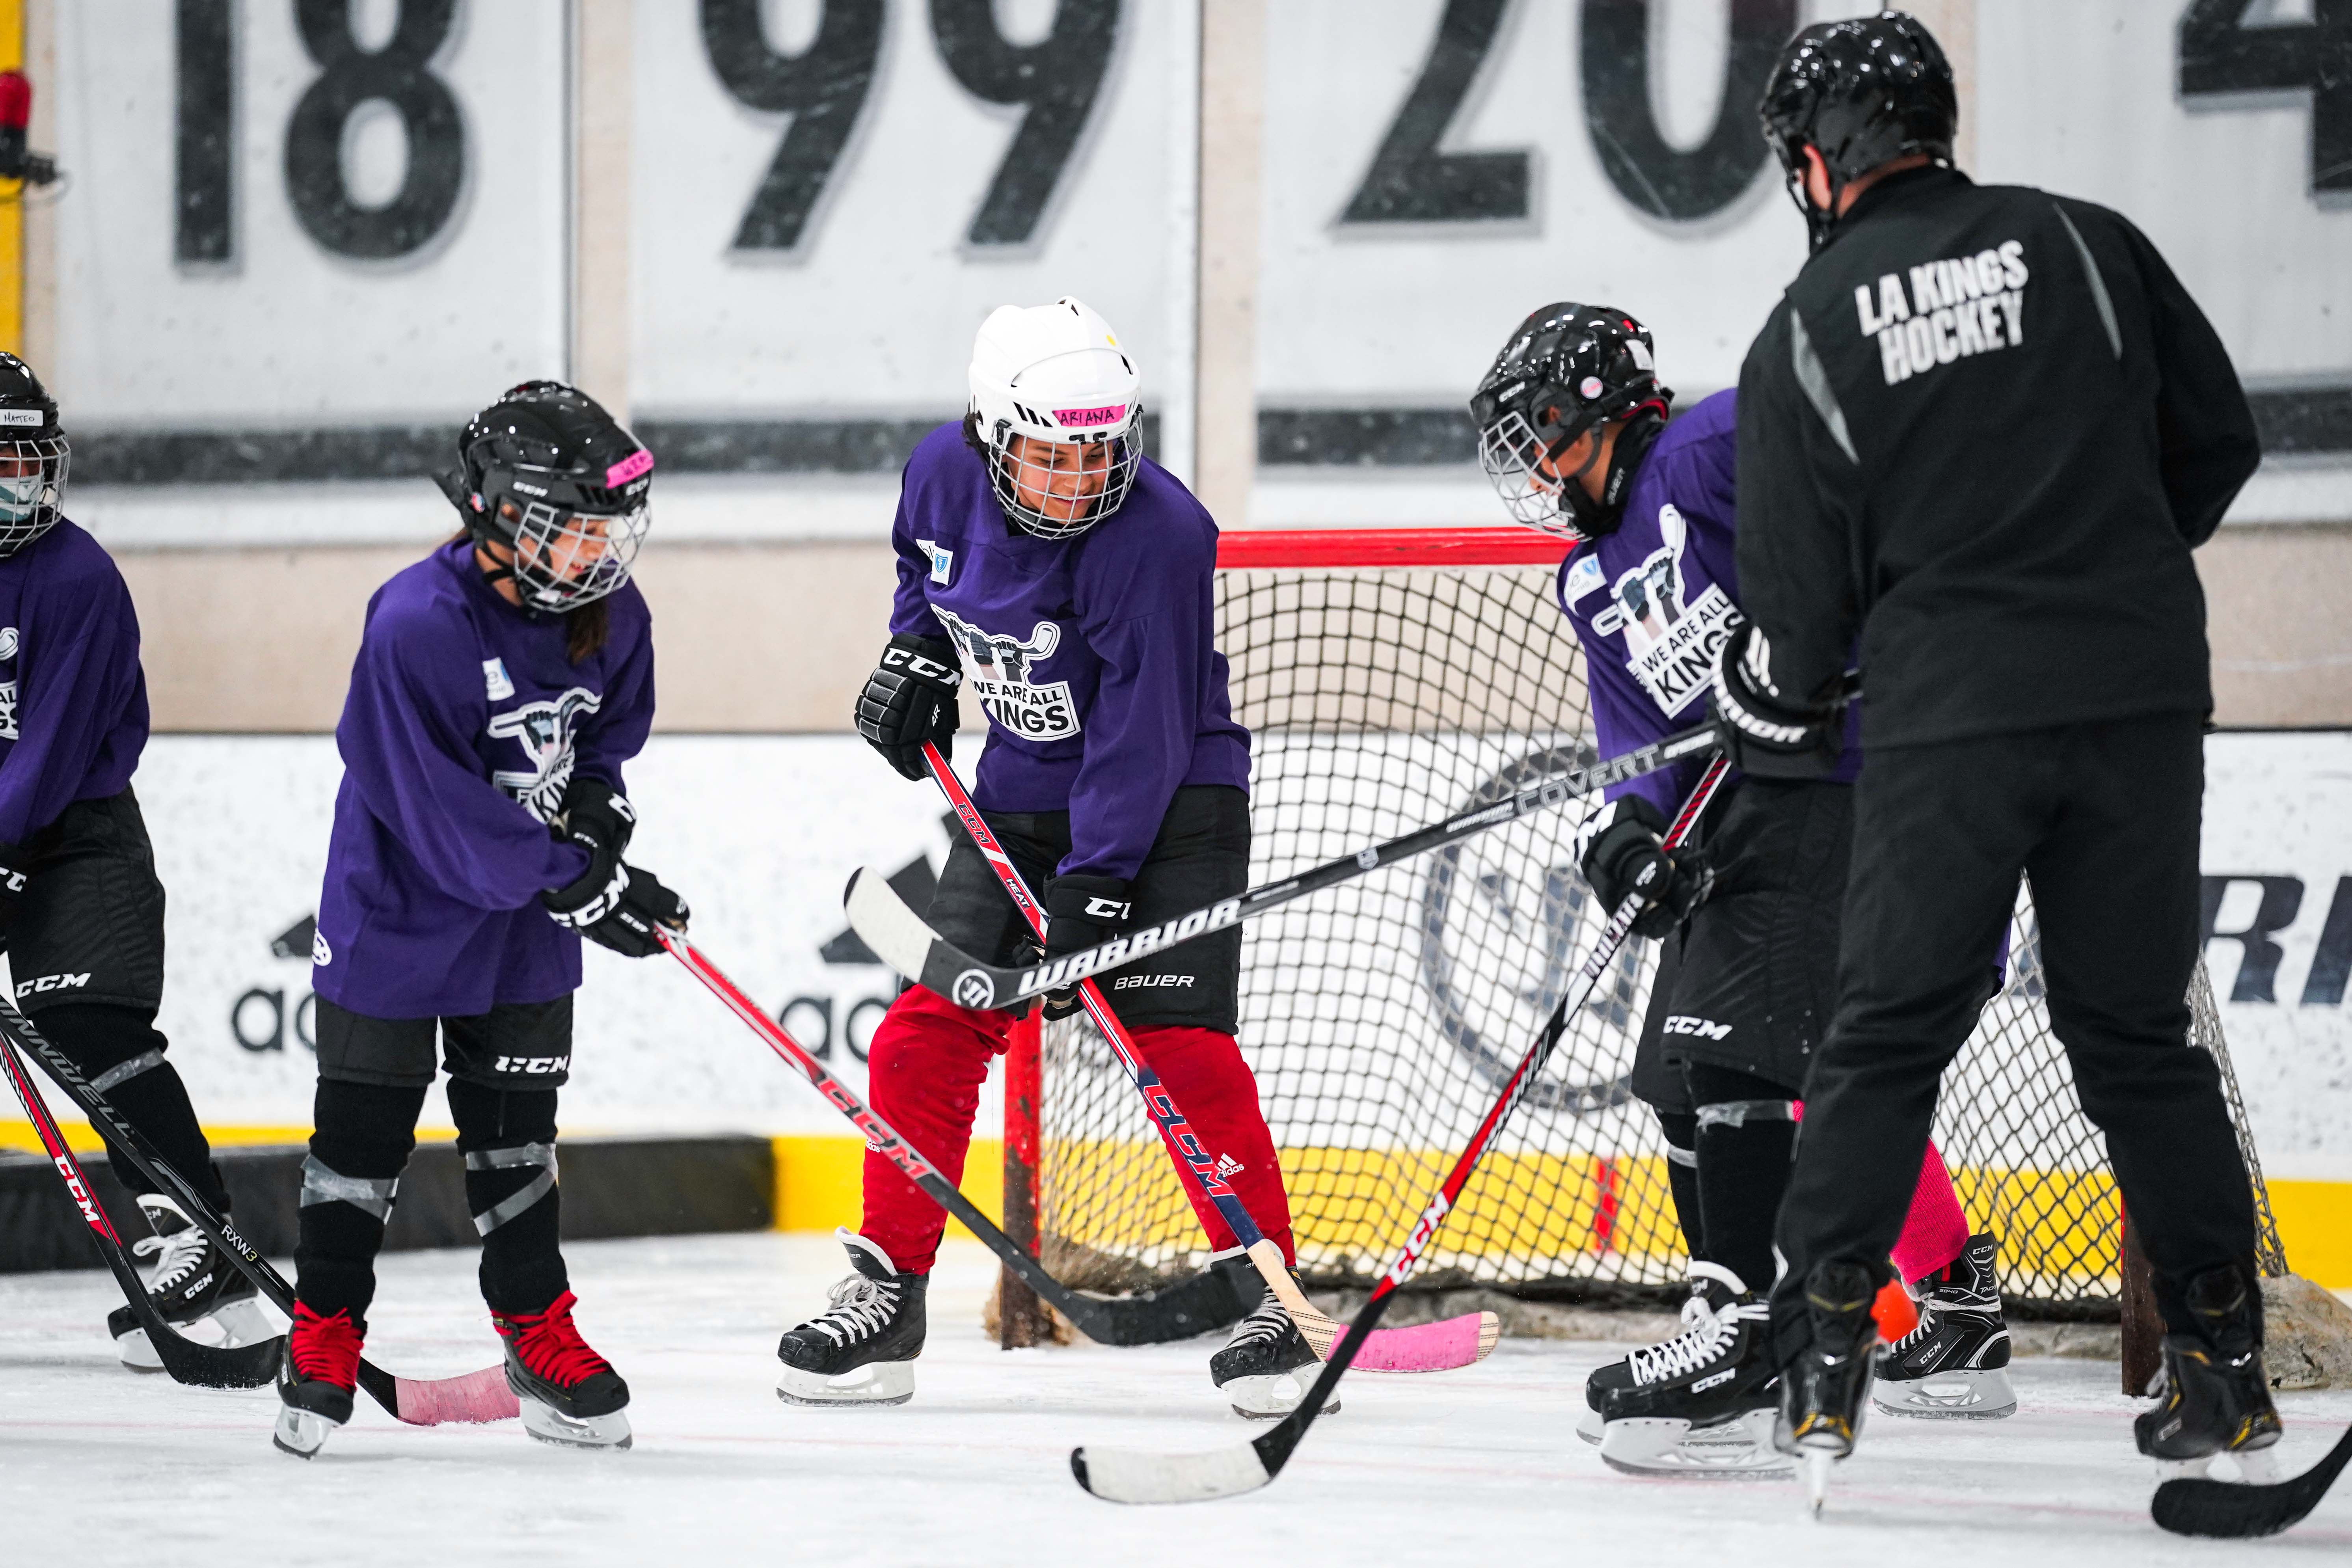 Youth camp participants play hockey on the ice rink at Toyota Sports Center.